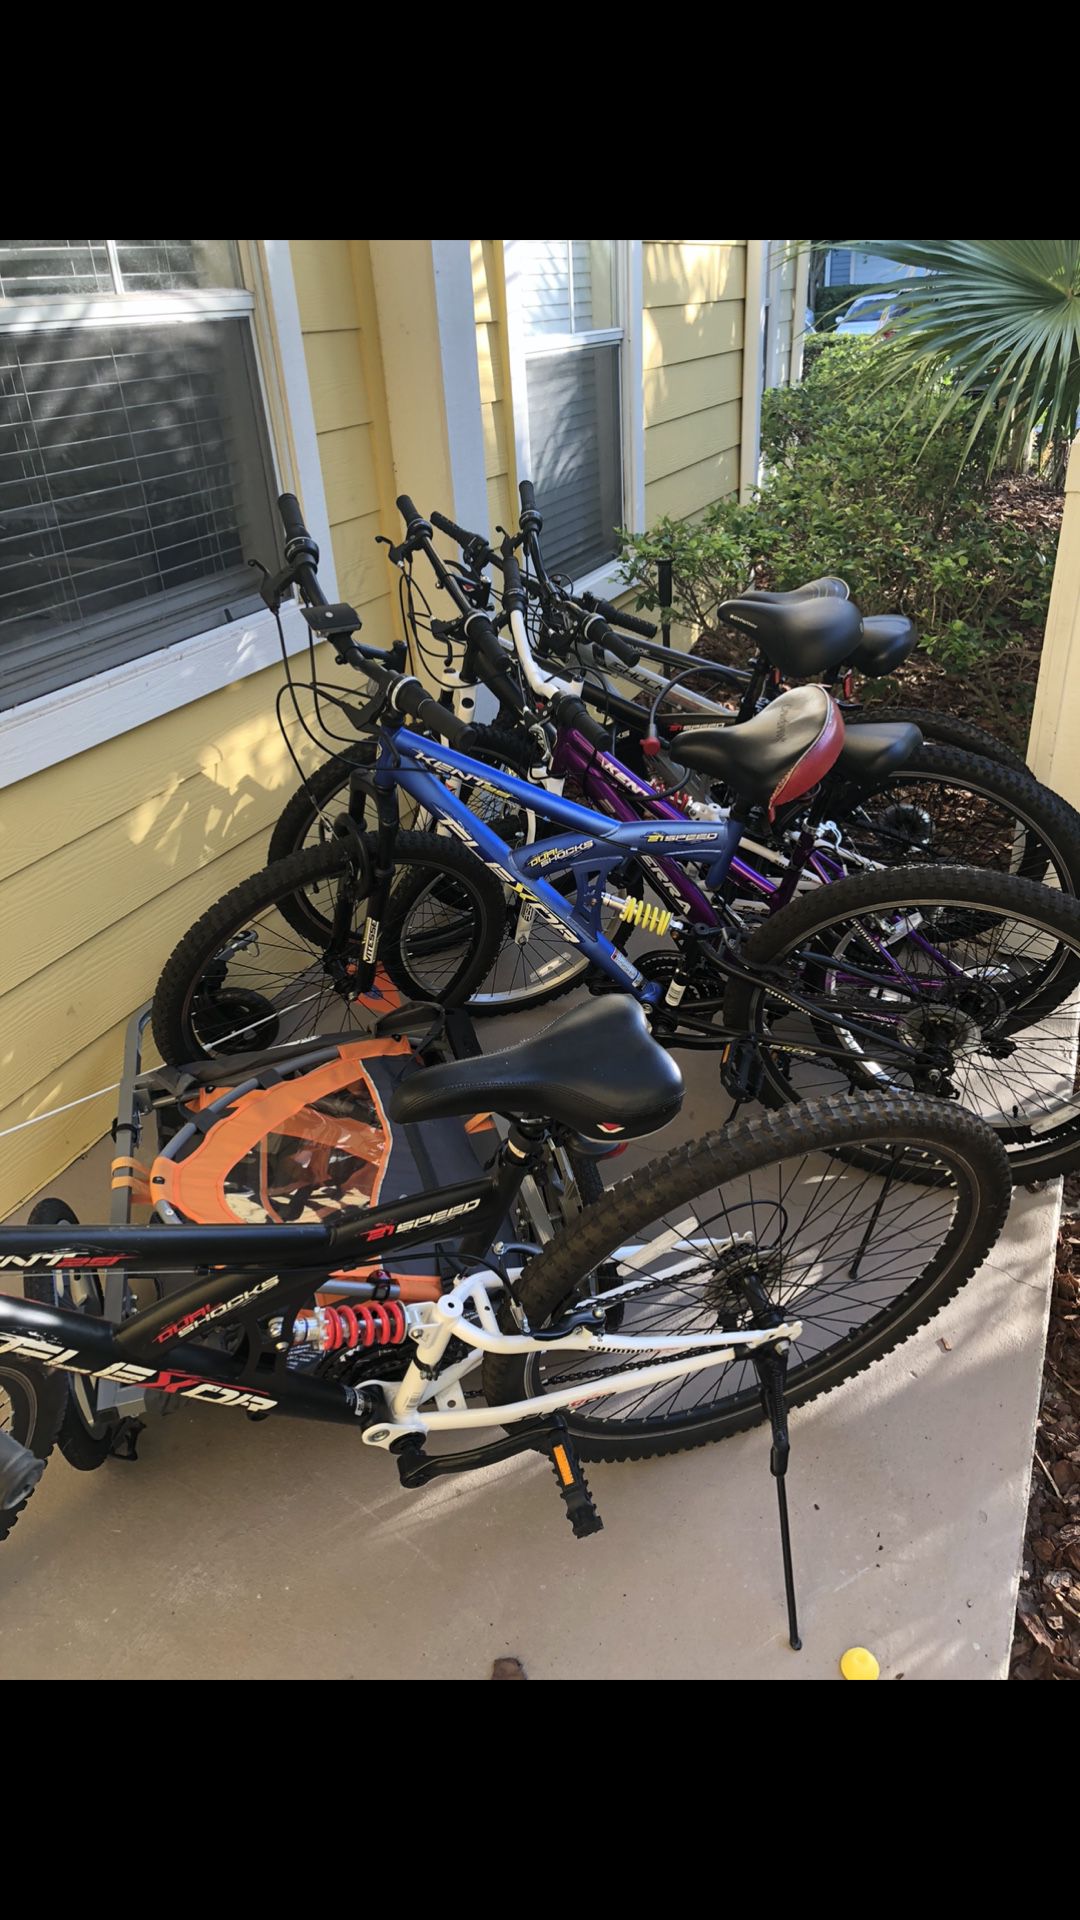 6 Bikes, Child Trailer And Bike Rack For Car or SUV